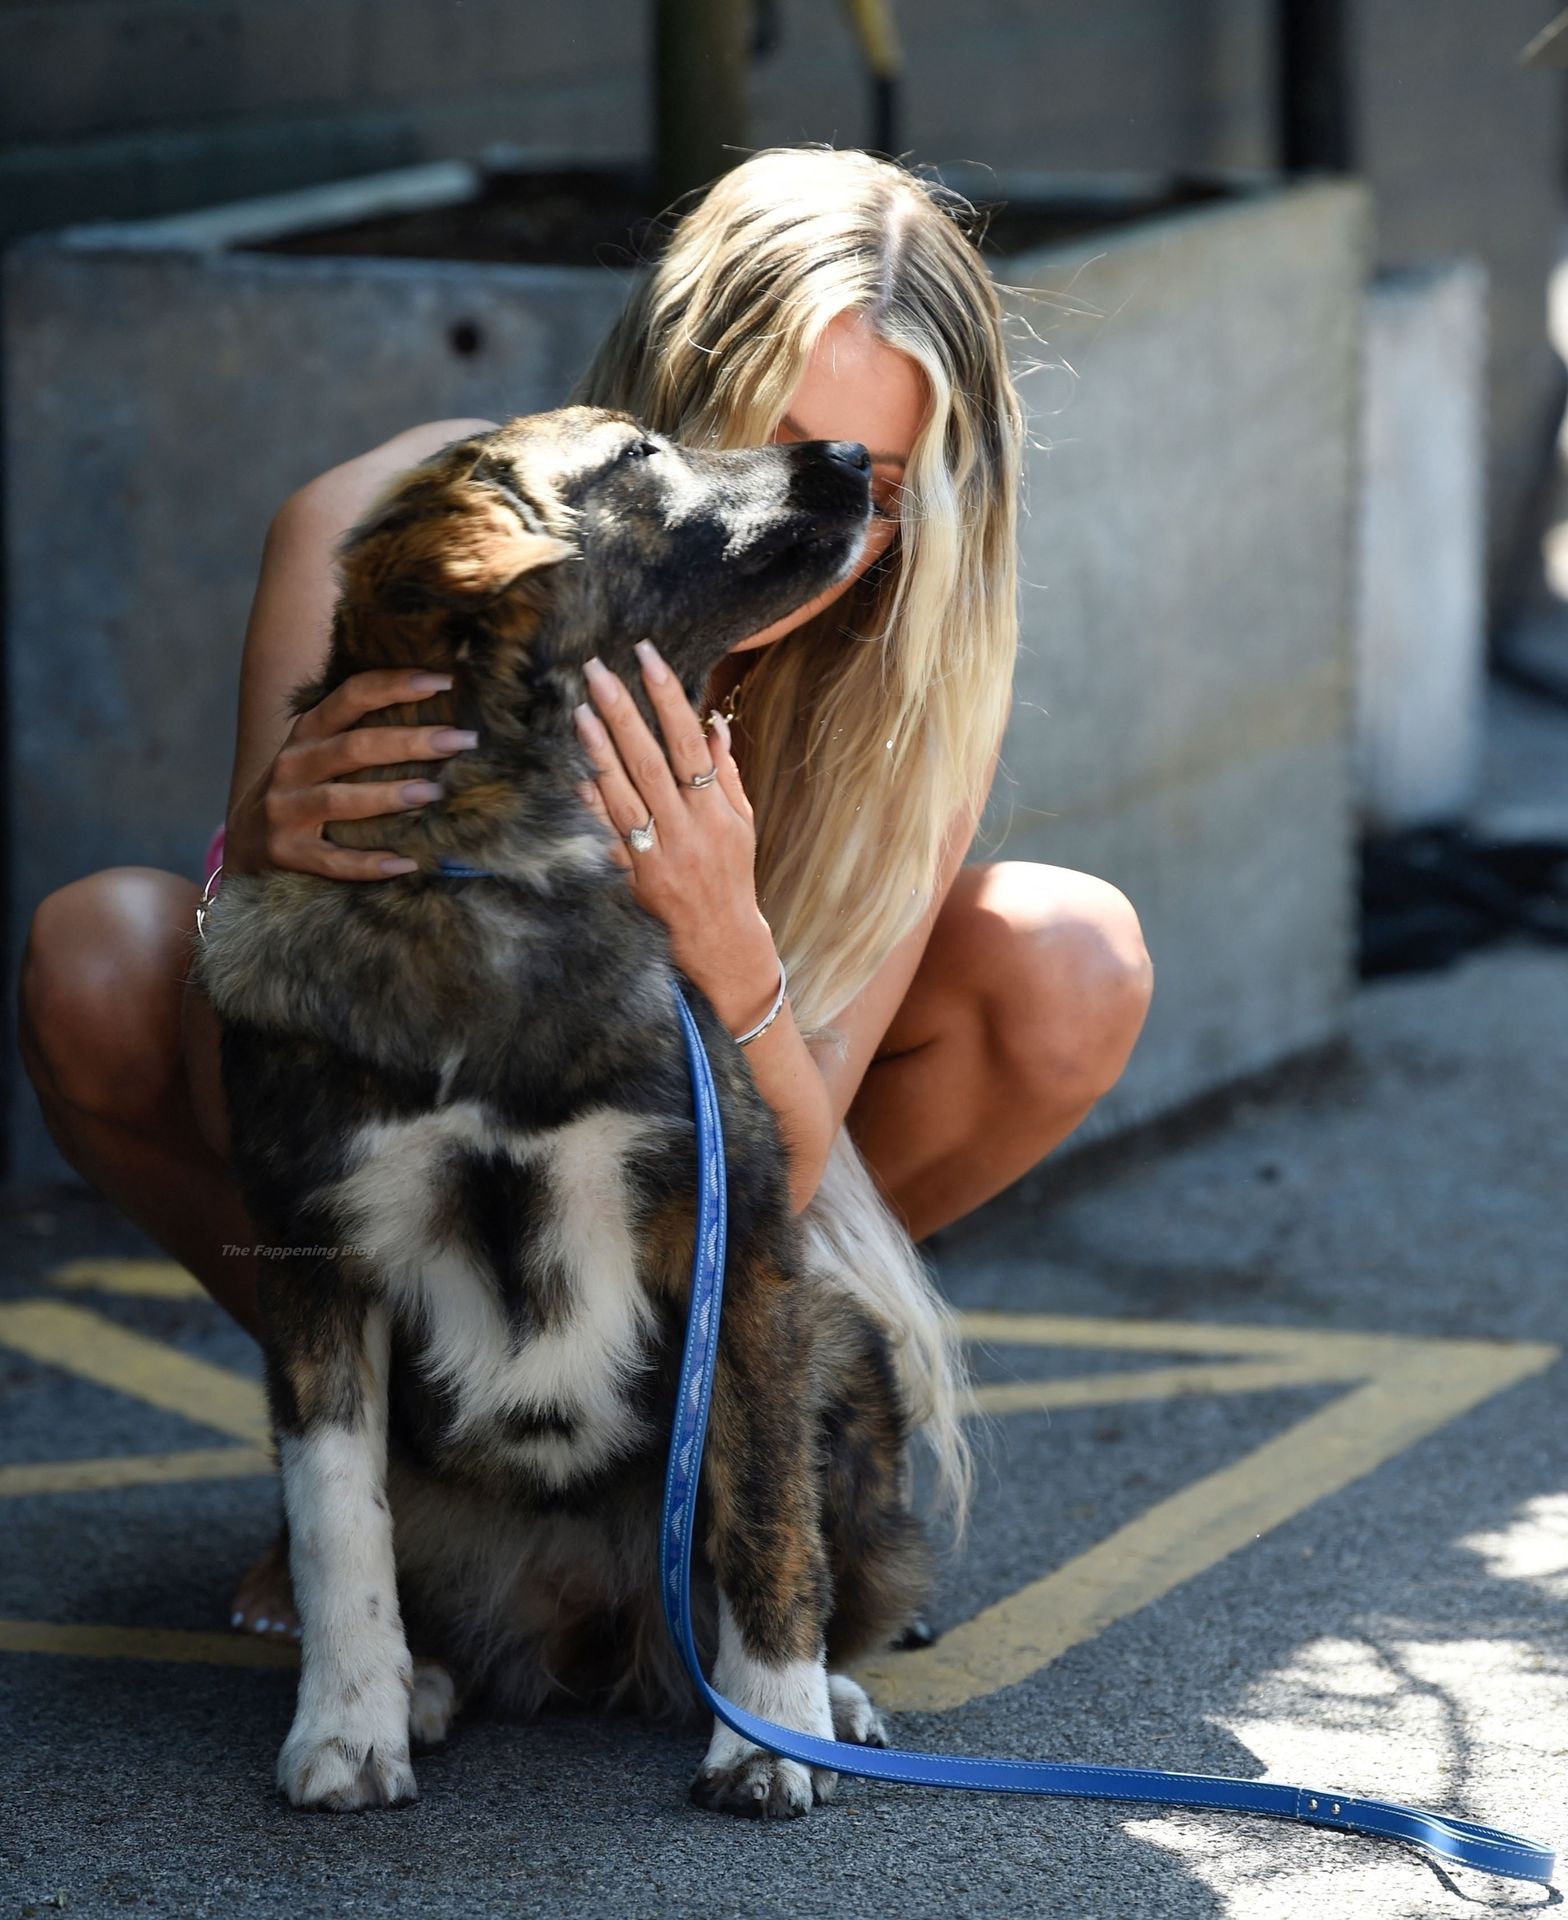 Olivia Attwood Poses with Her Dog at a Photoshoot in Manchester (53 Photos)